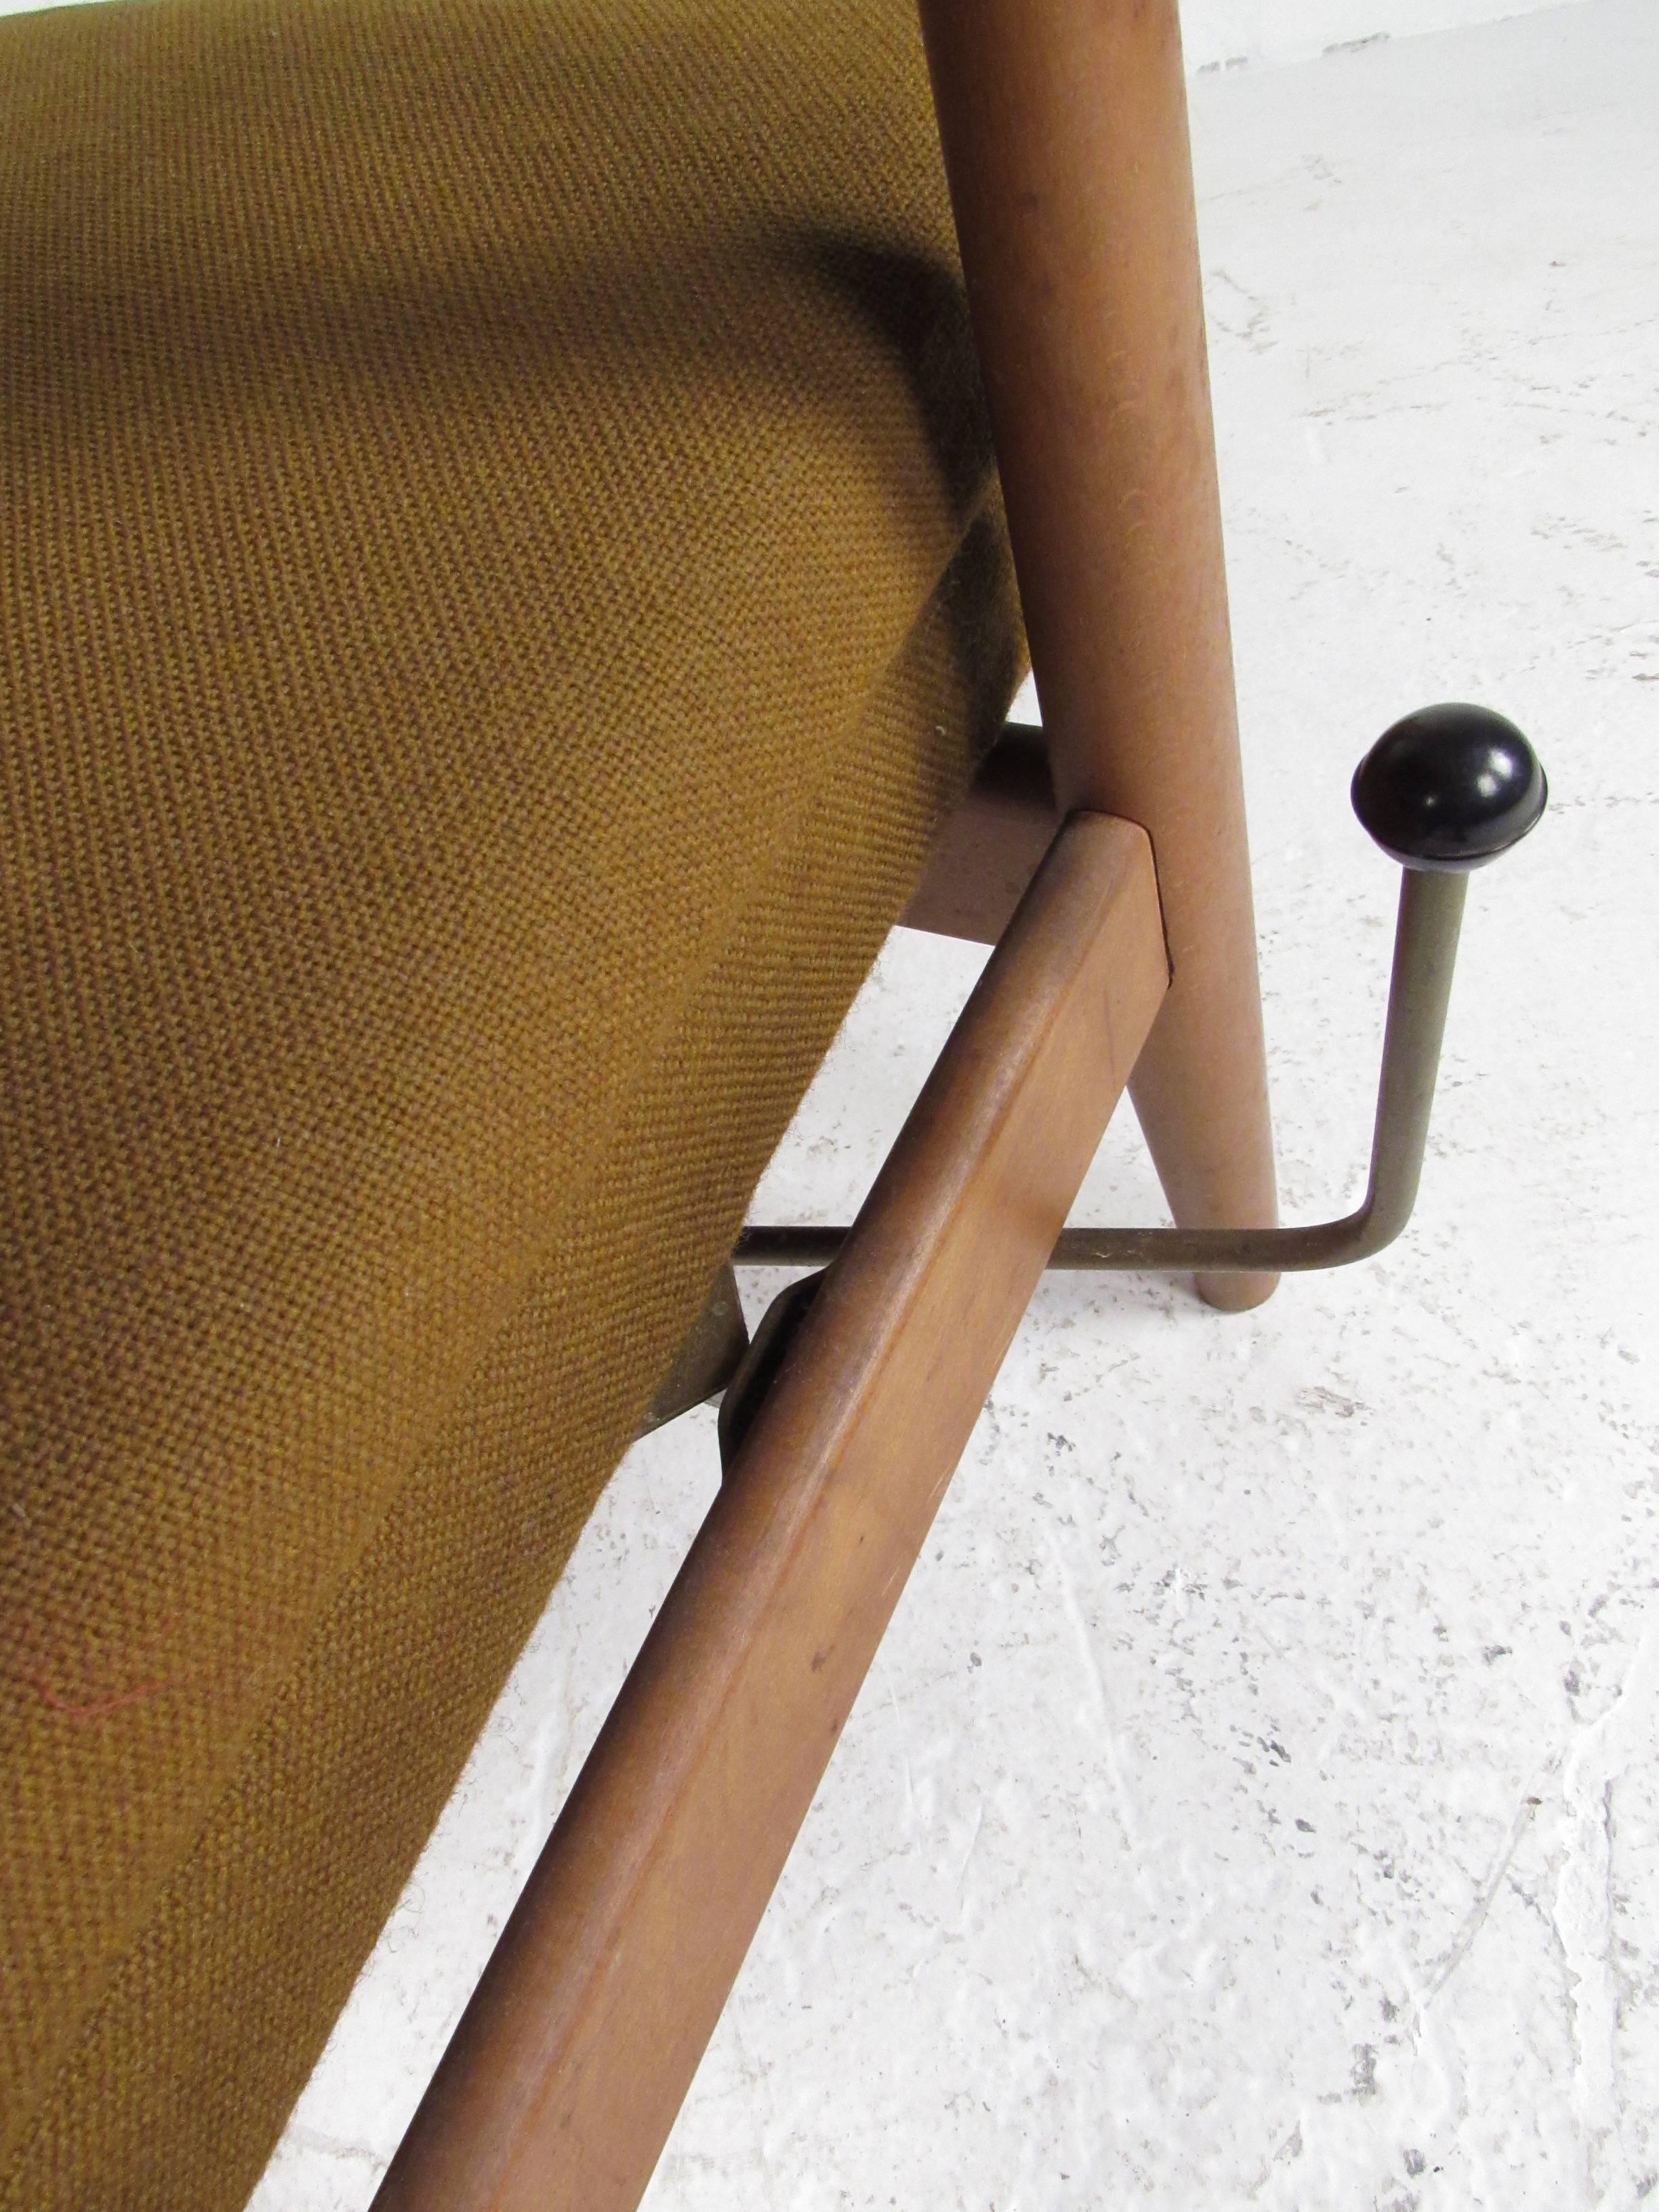 Mid-20th Century Tall Danish Modern Lounge Chair For Sale